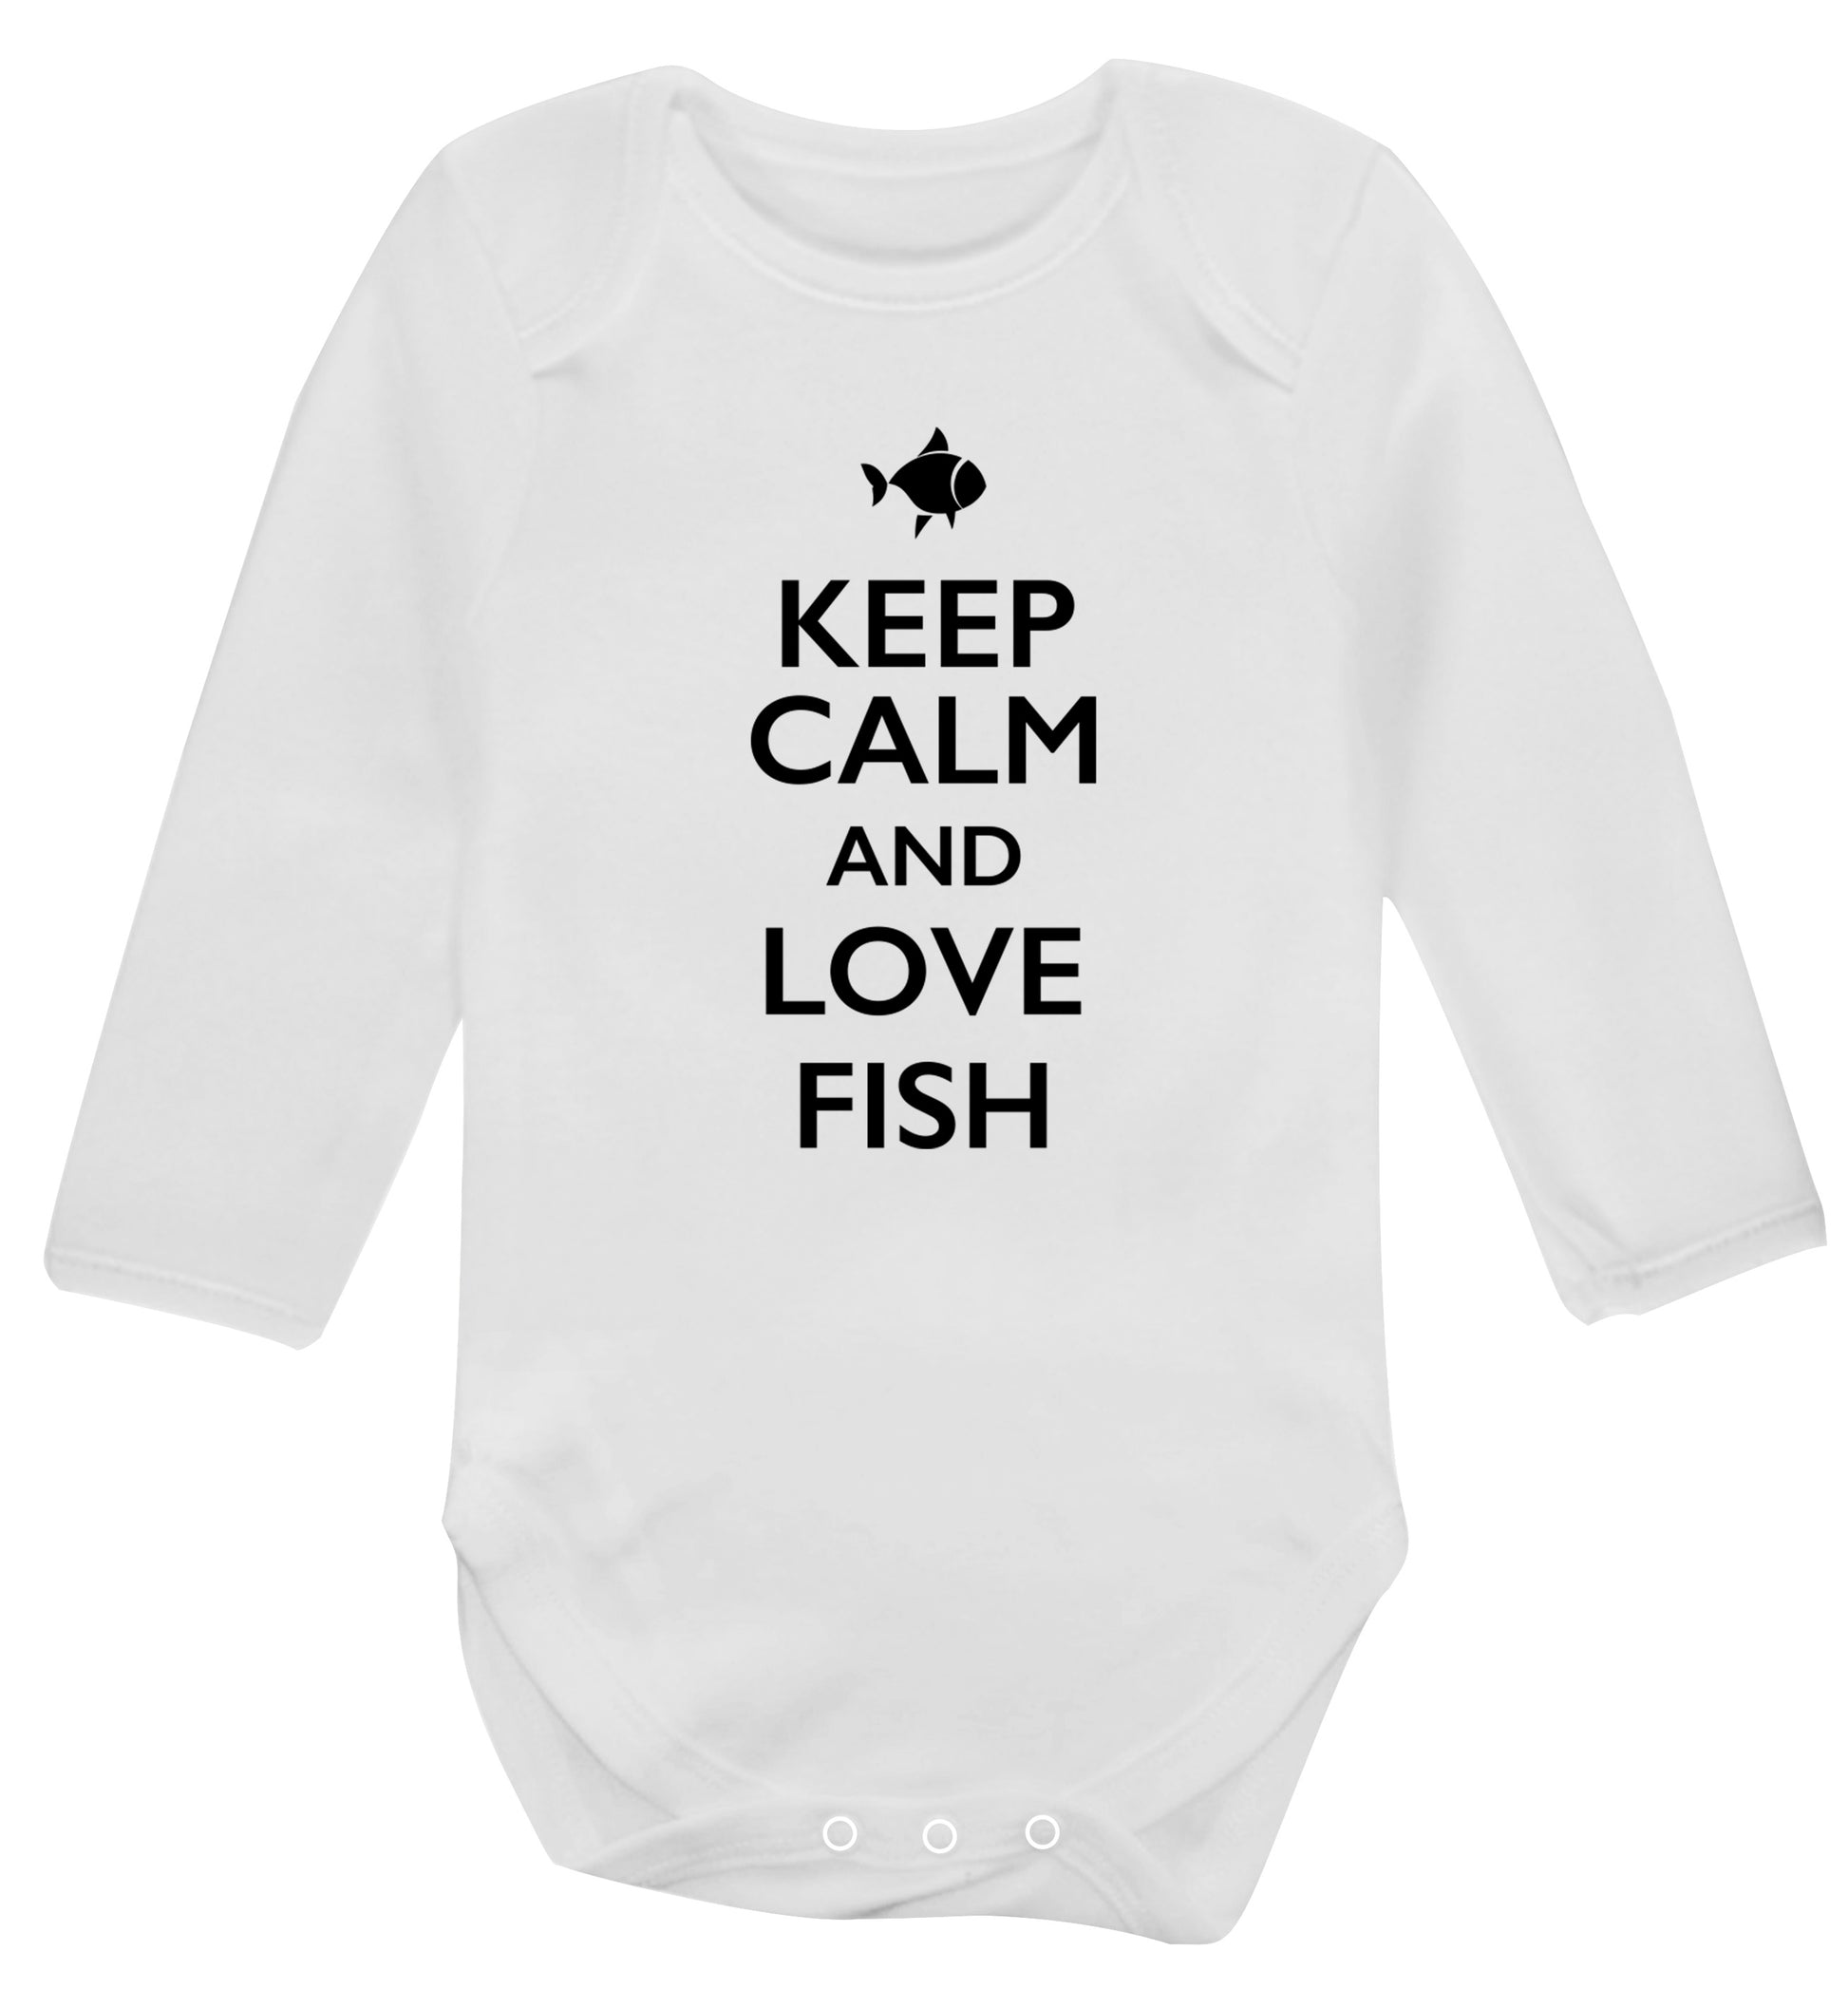 Keep calm and love fish Baby Vest long sleeved white 6-12 months